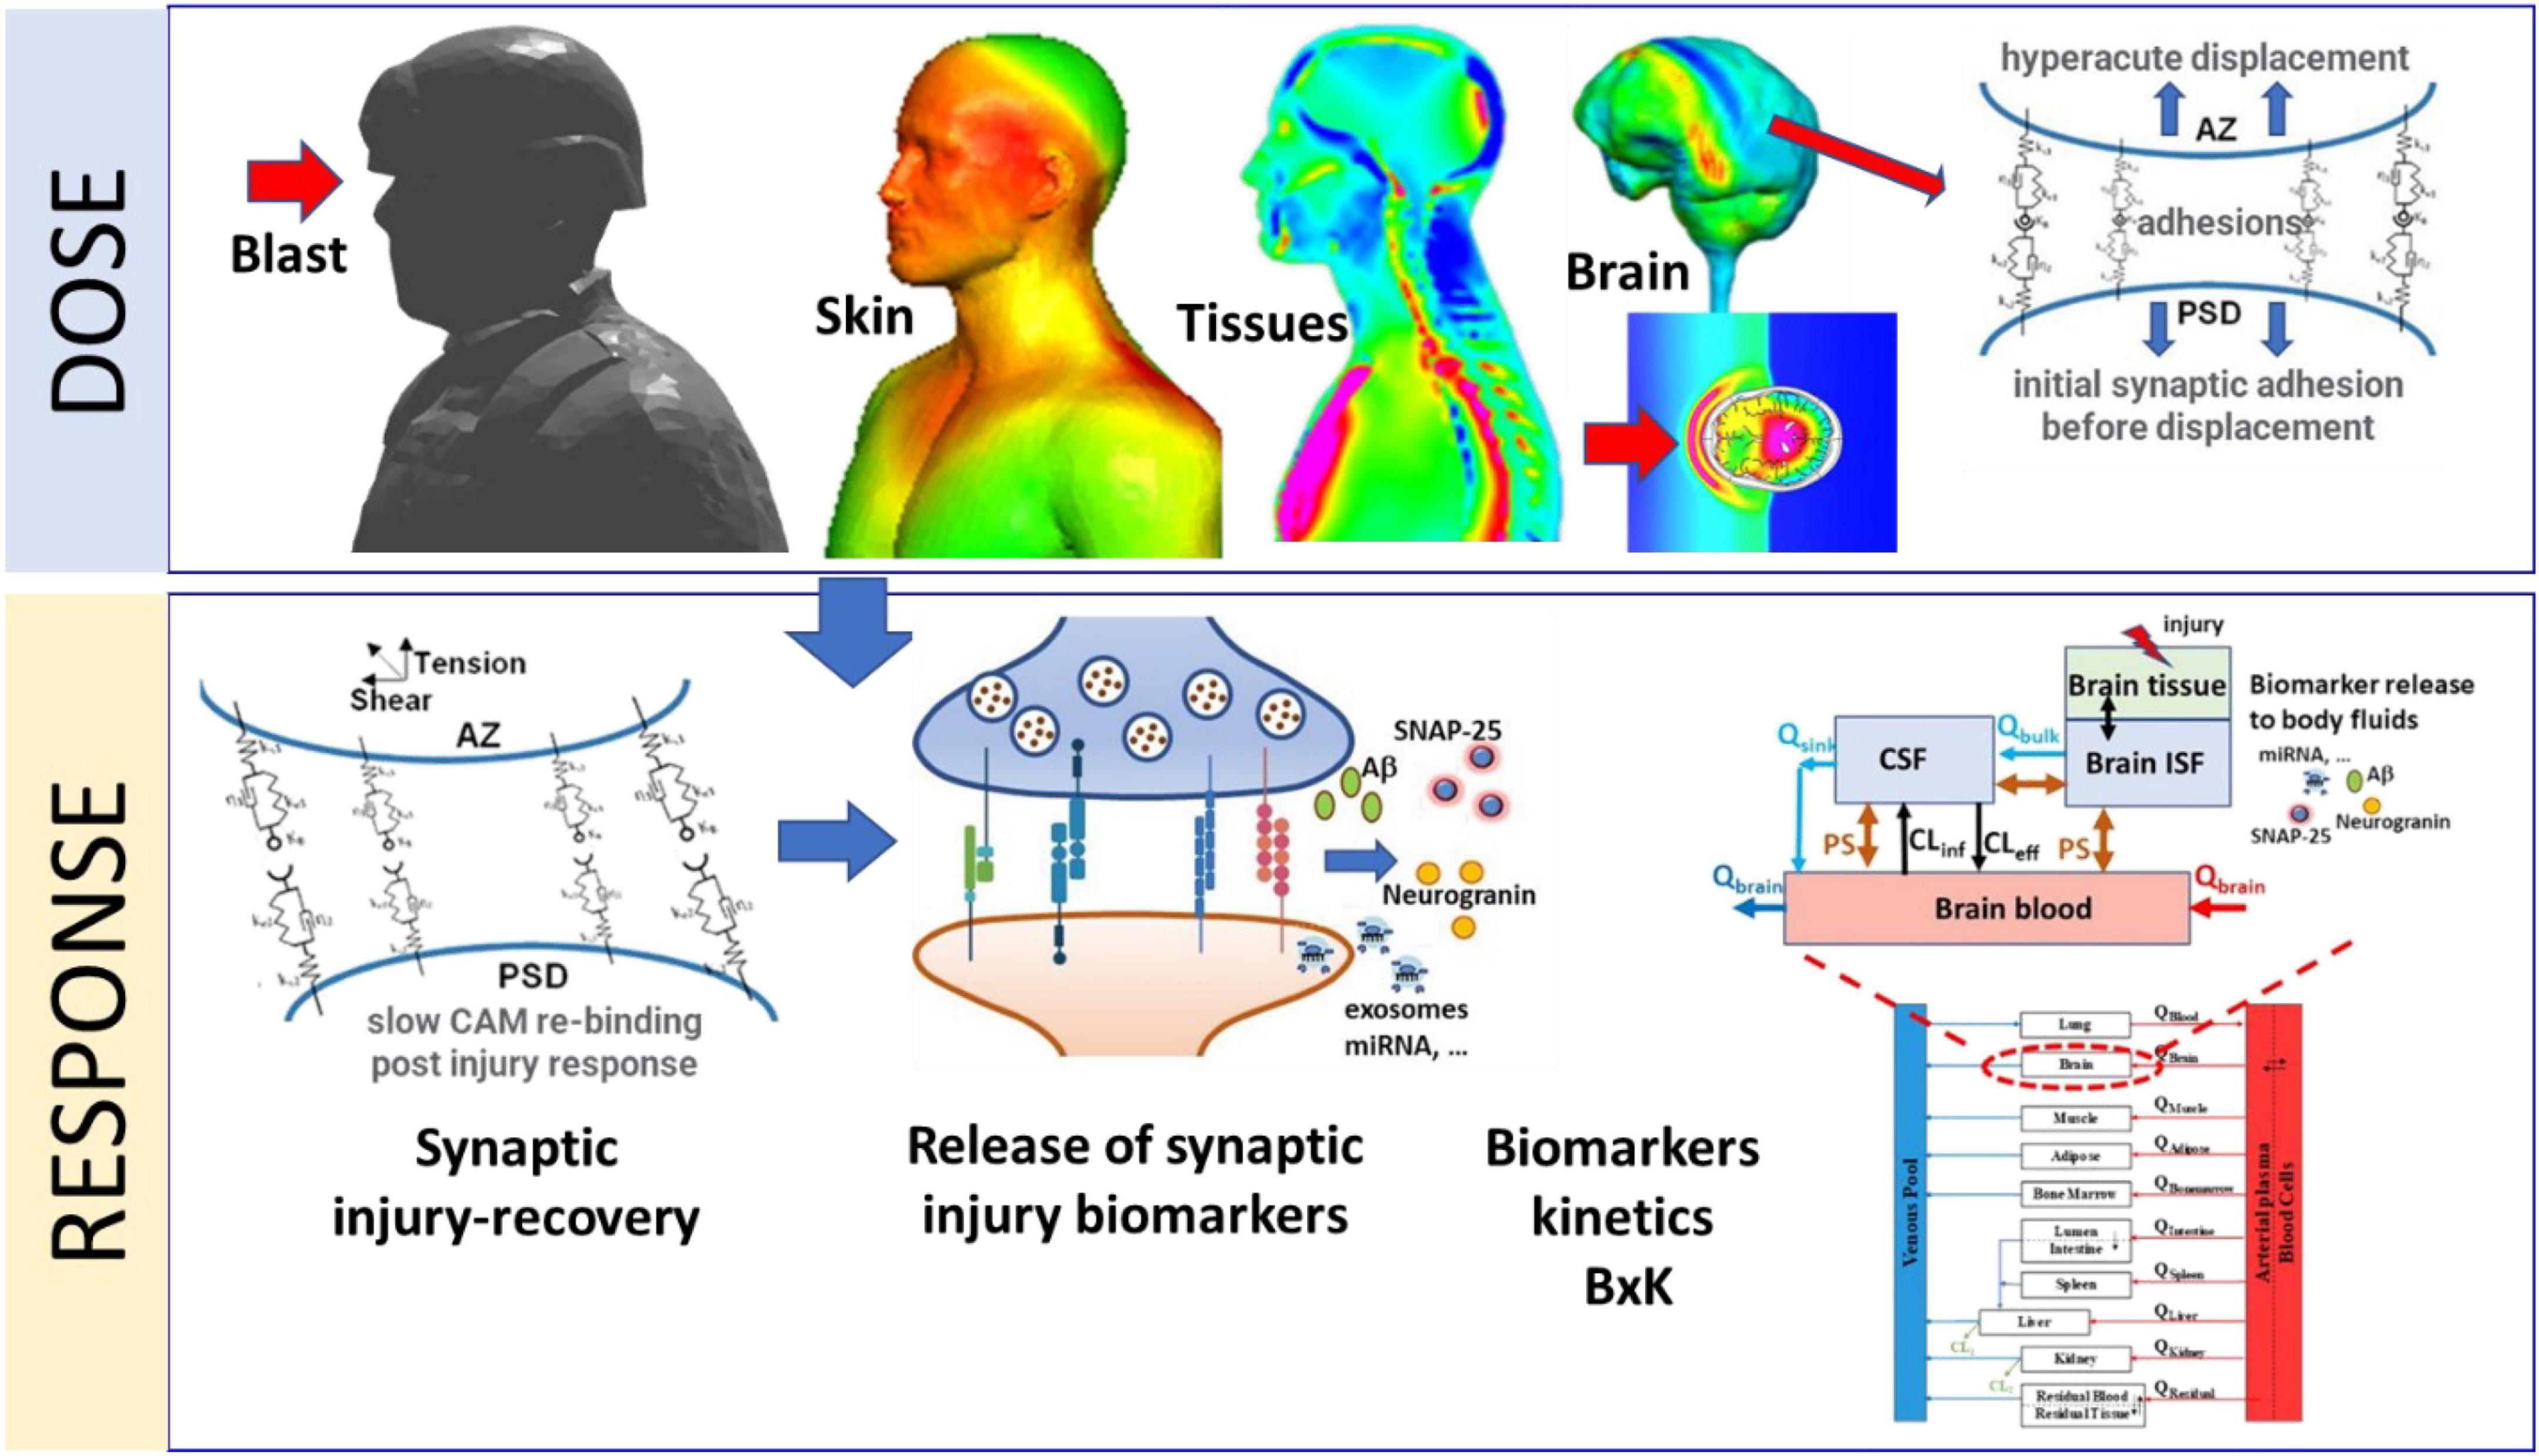 Mathematical model of mechanobiology of acute and repeated synaptic injury and systemic biomarker kinetics